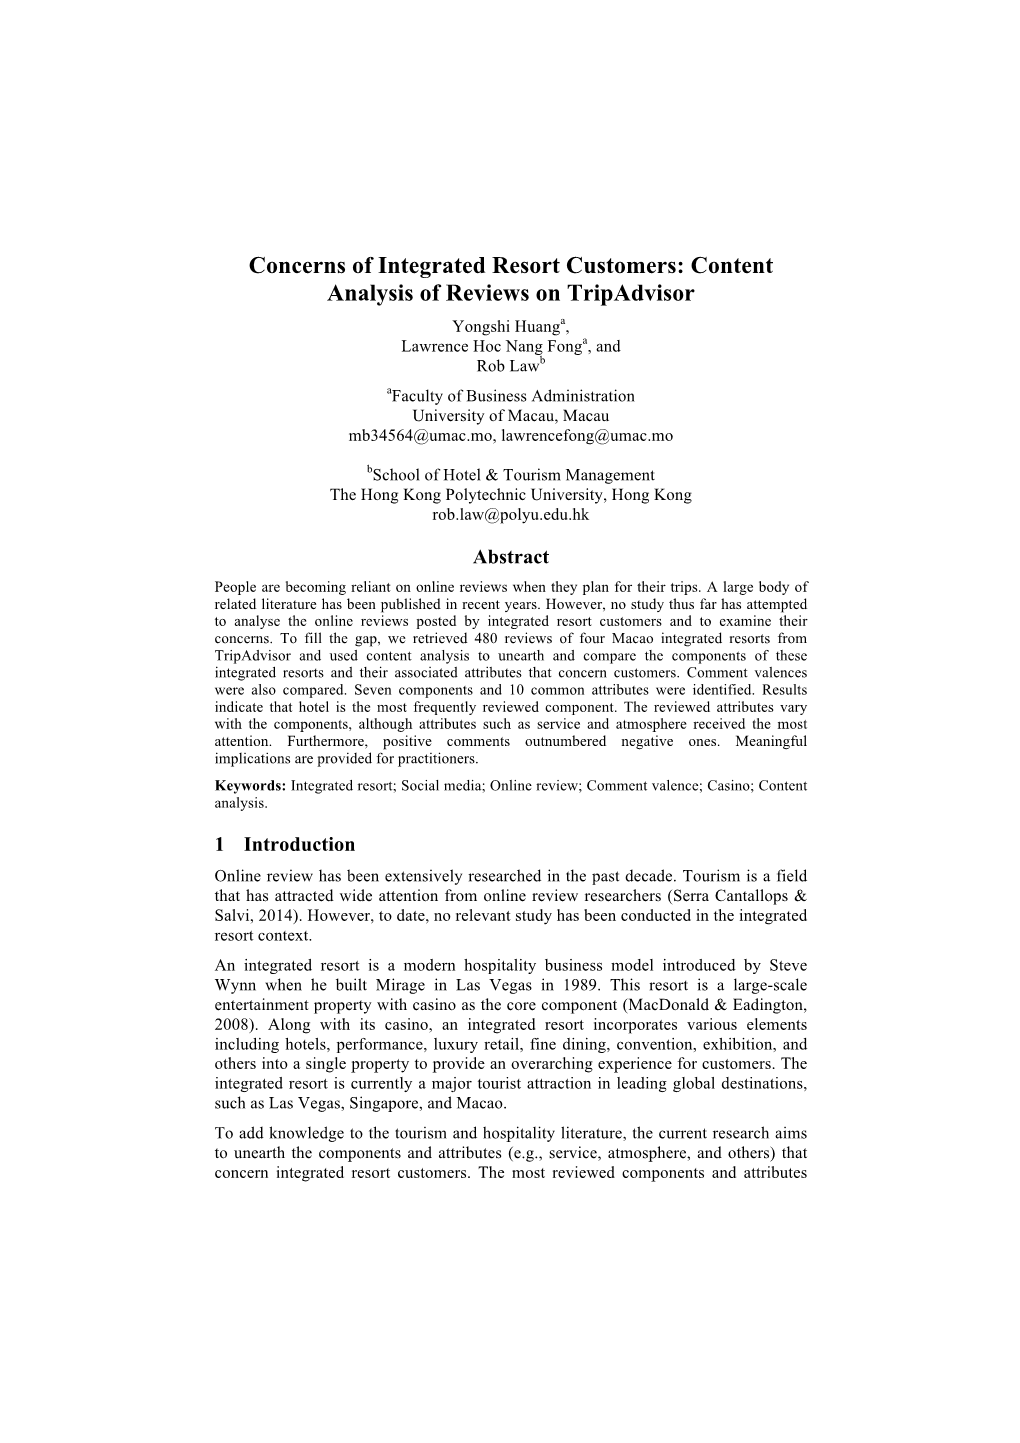 Concerns of Integrated Resort Customers: Content Analysis Of